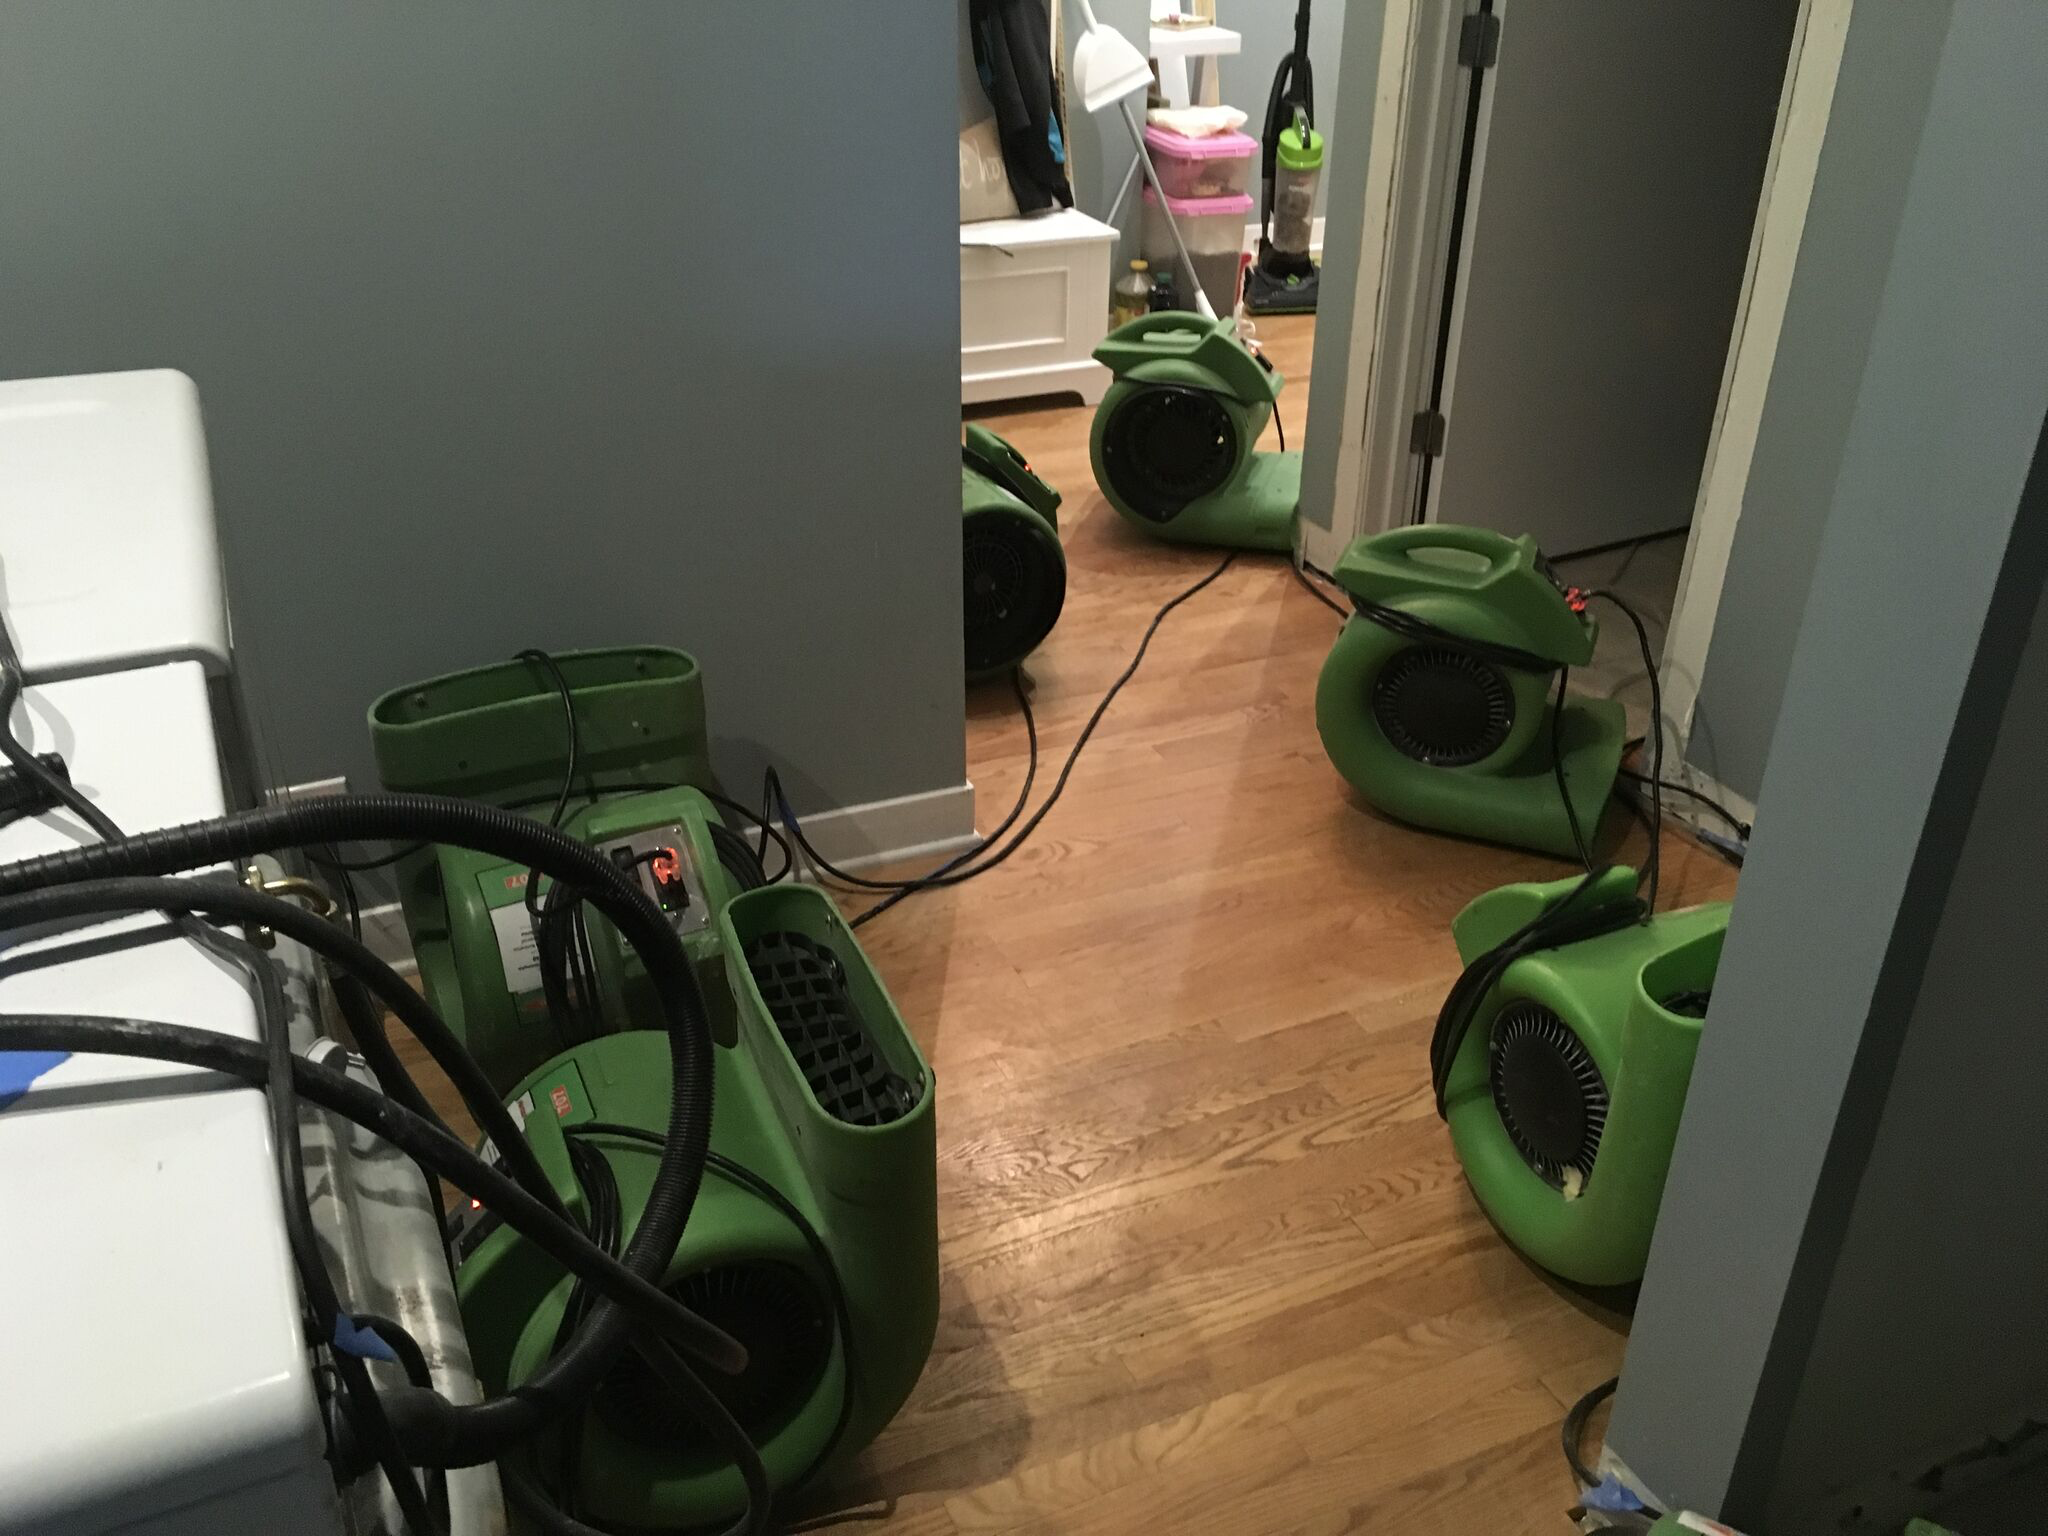 The SERVPRO equipment is up and running during a residential restoration.